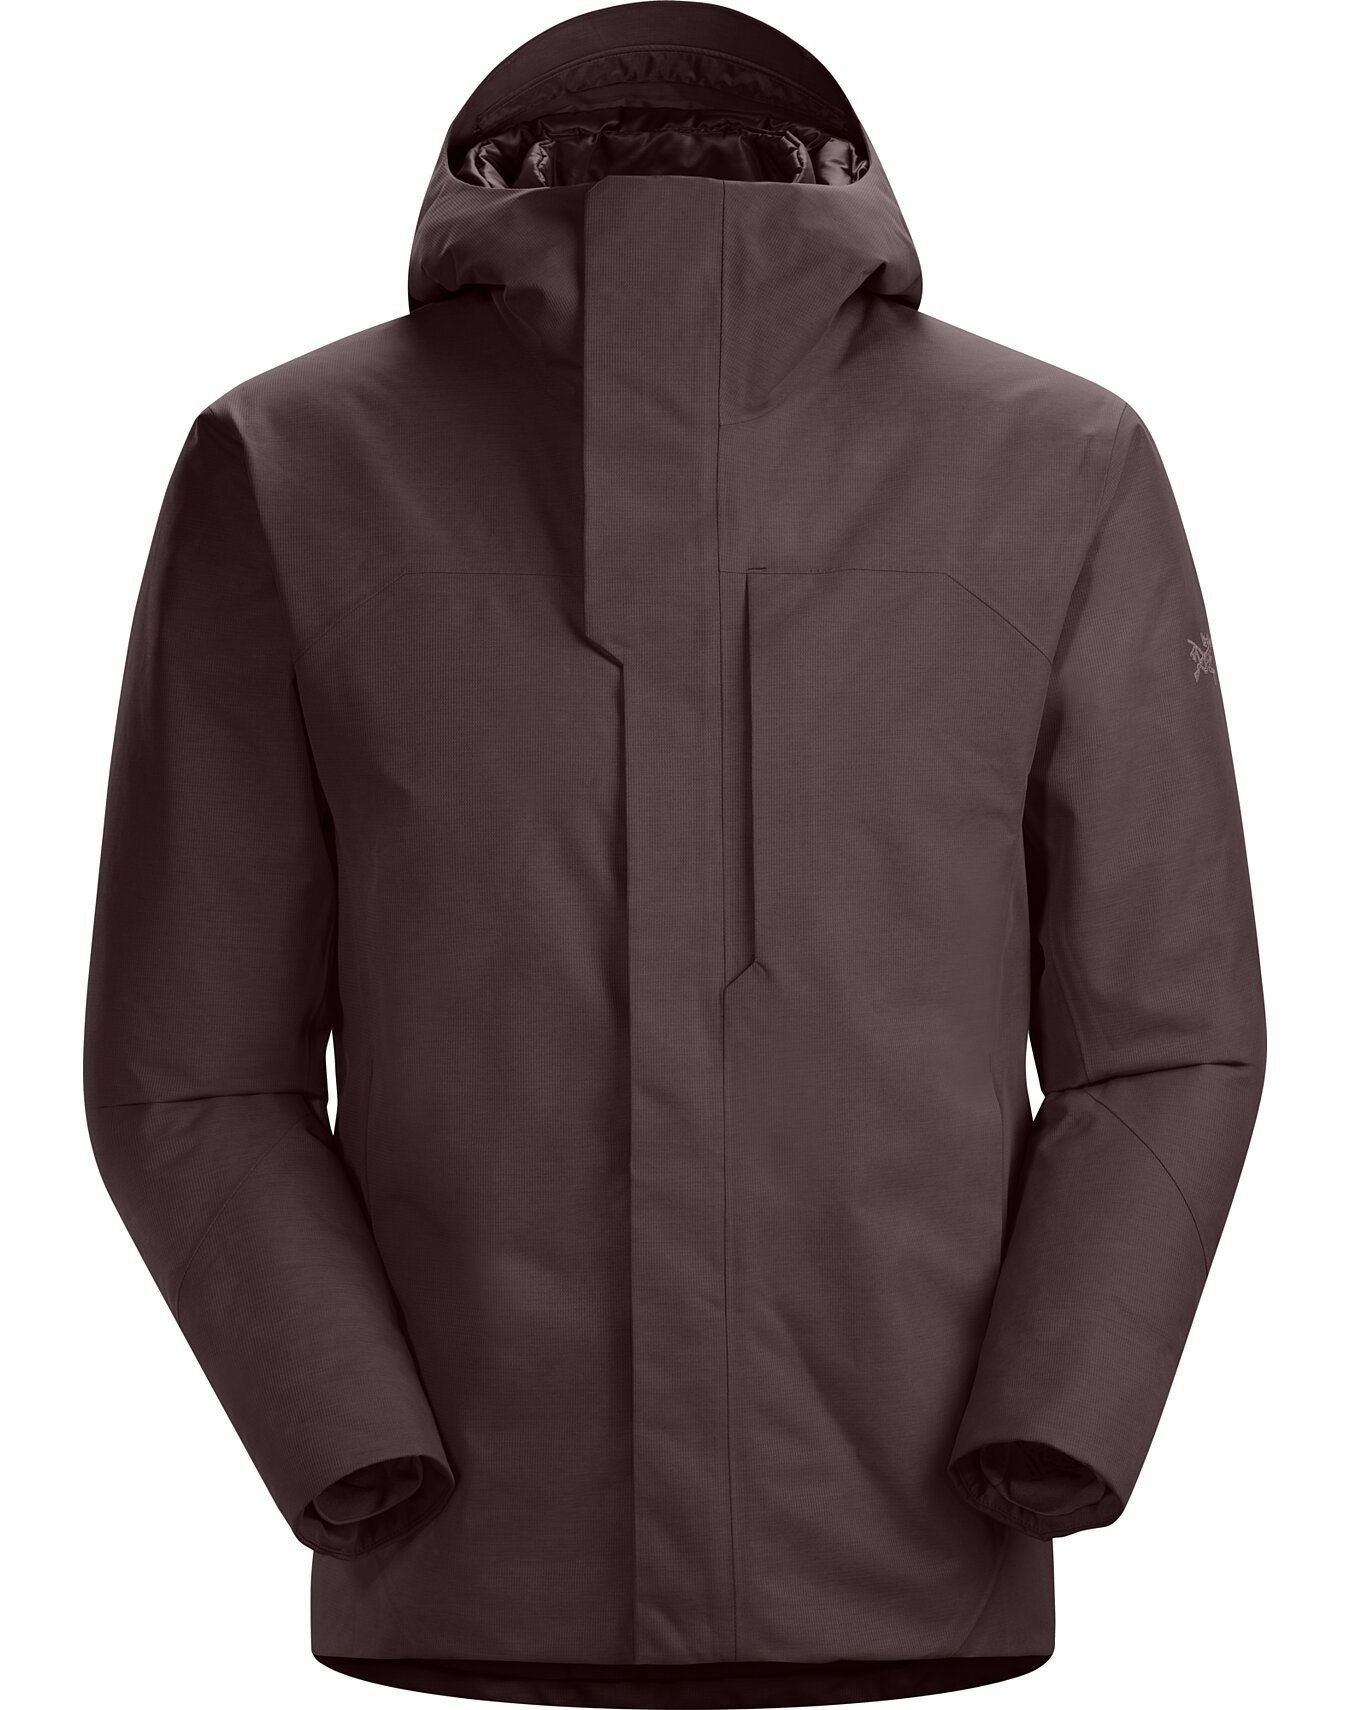 Therme LT Jacket Figment